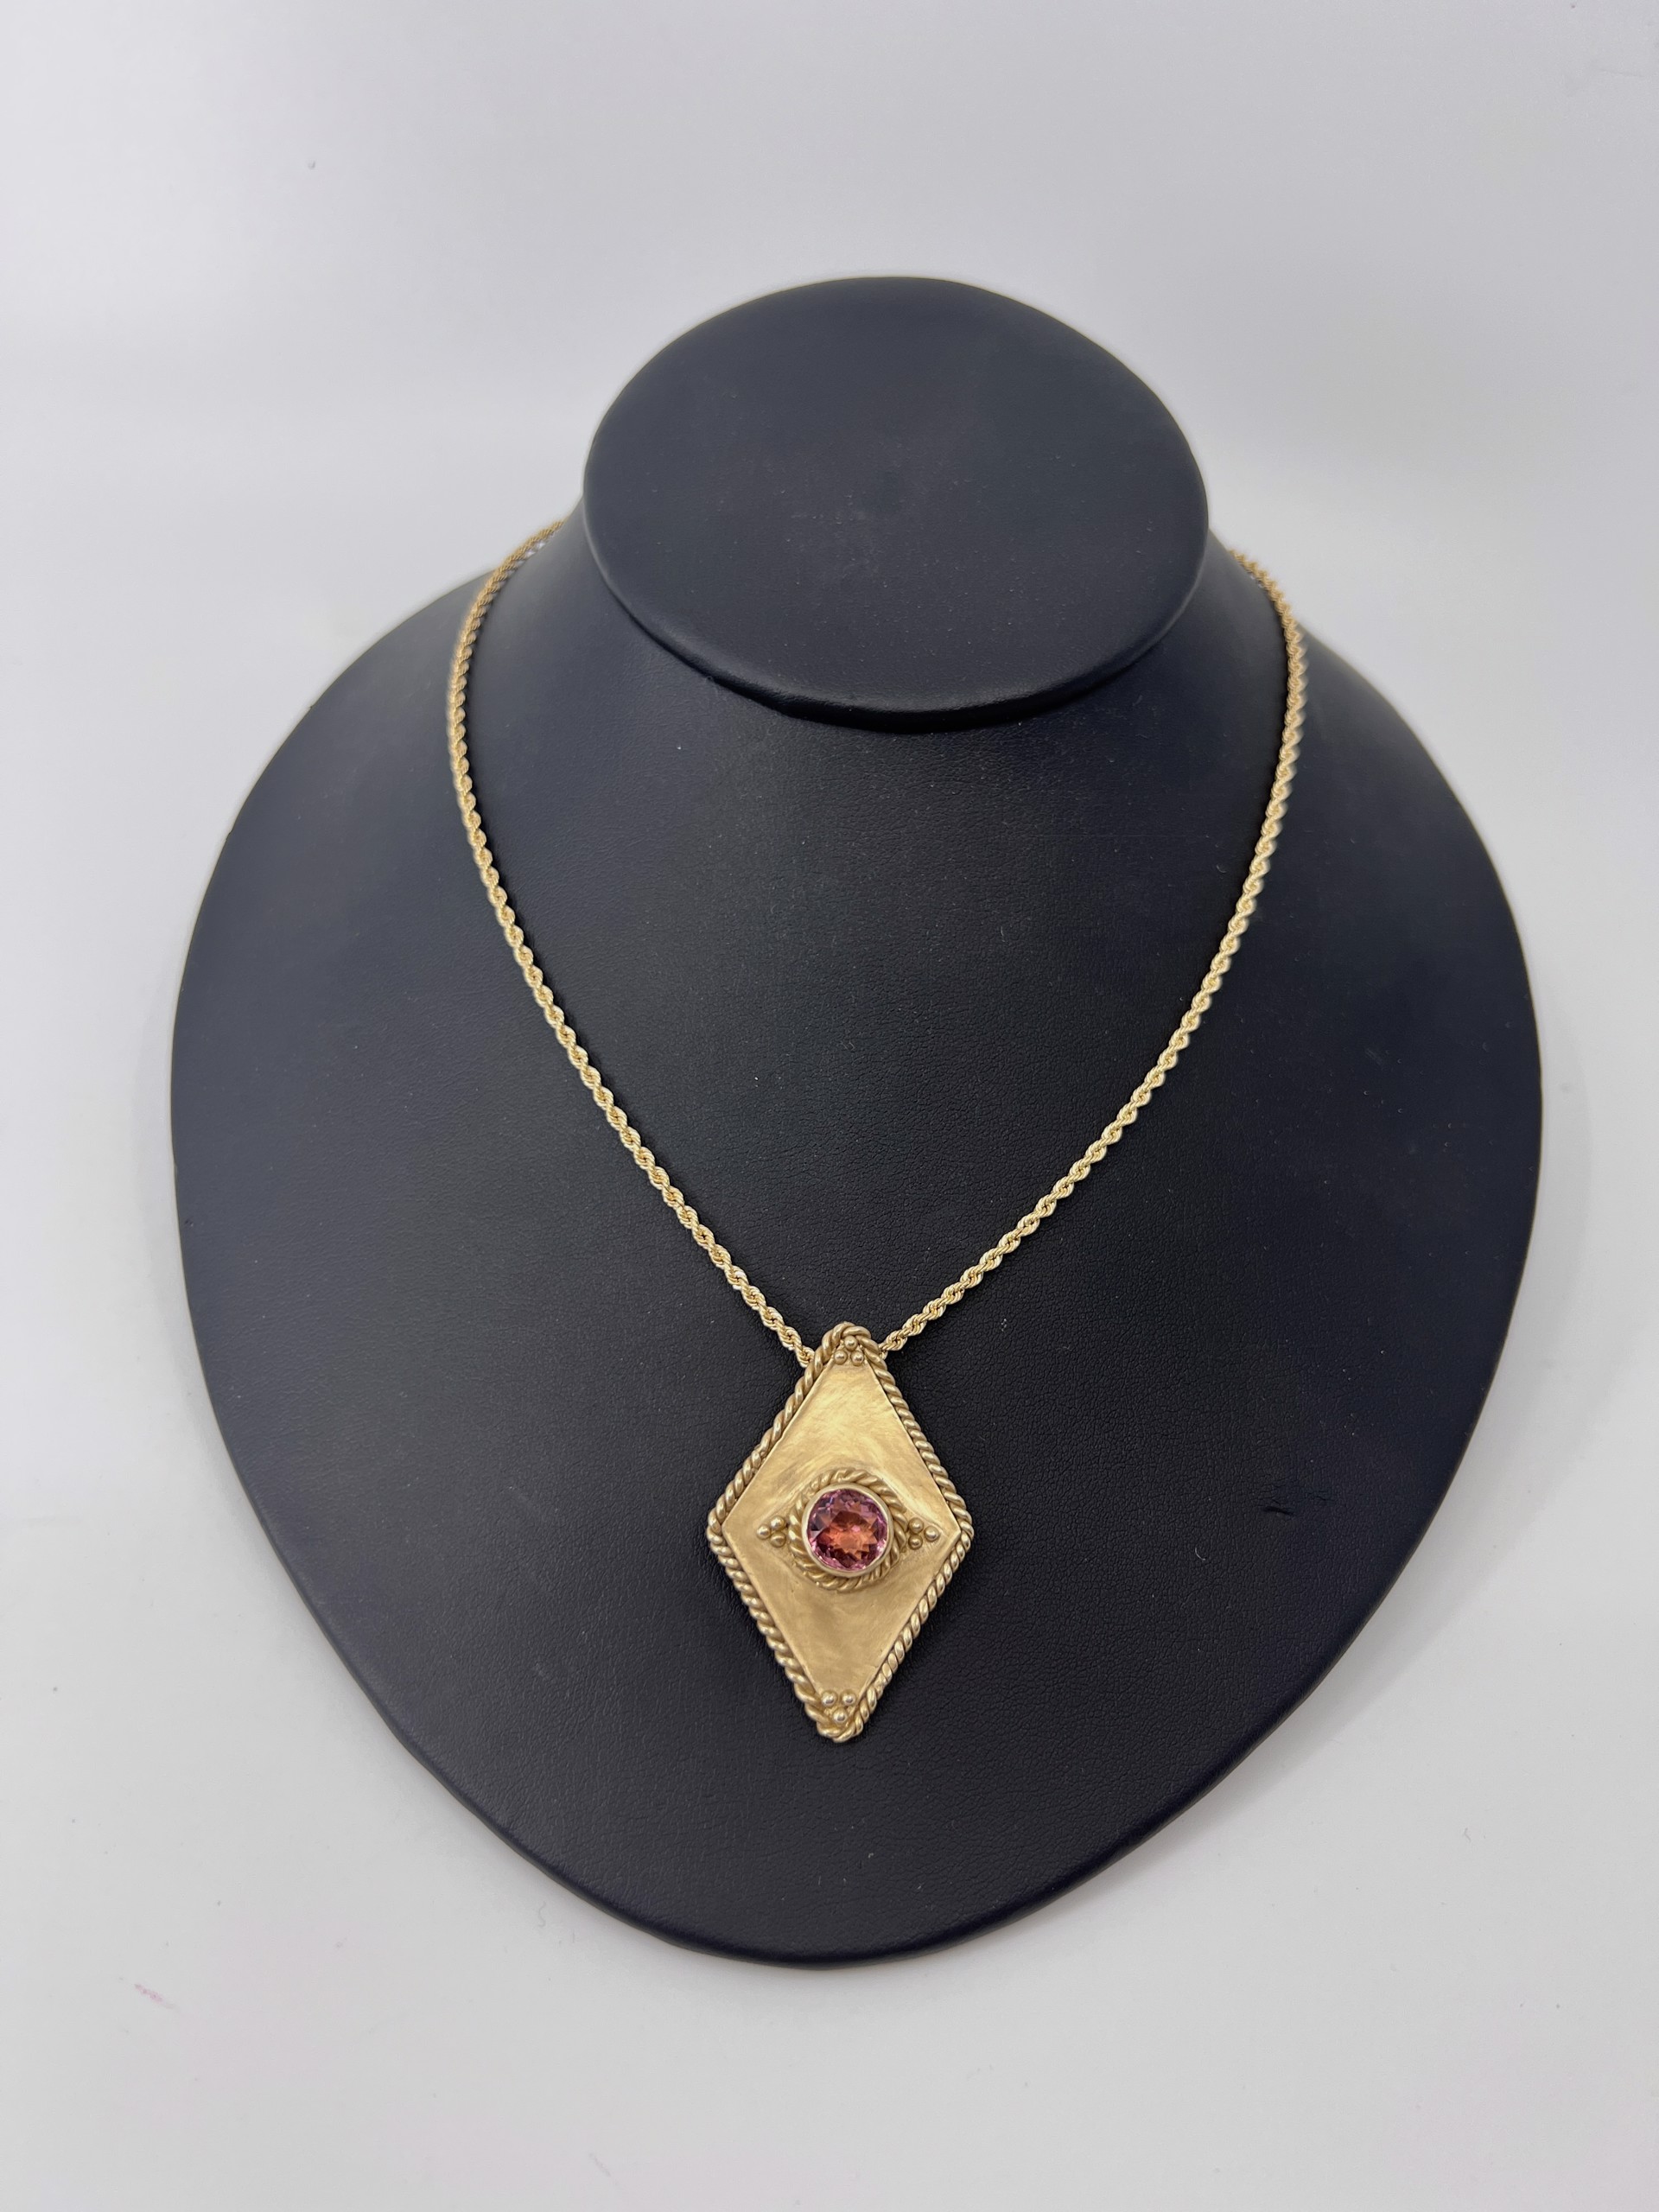 14K Gold Diamond Shape Pendant with Rope Border and Pink Tourmaline by Beth Benowich